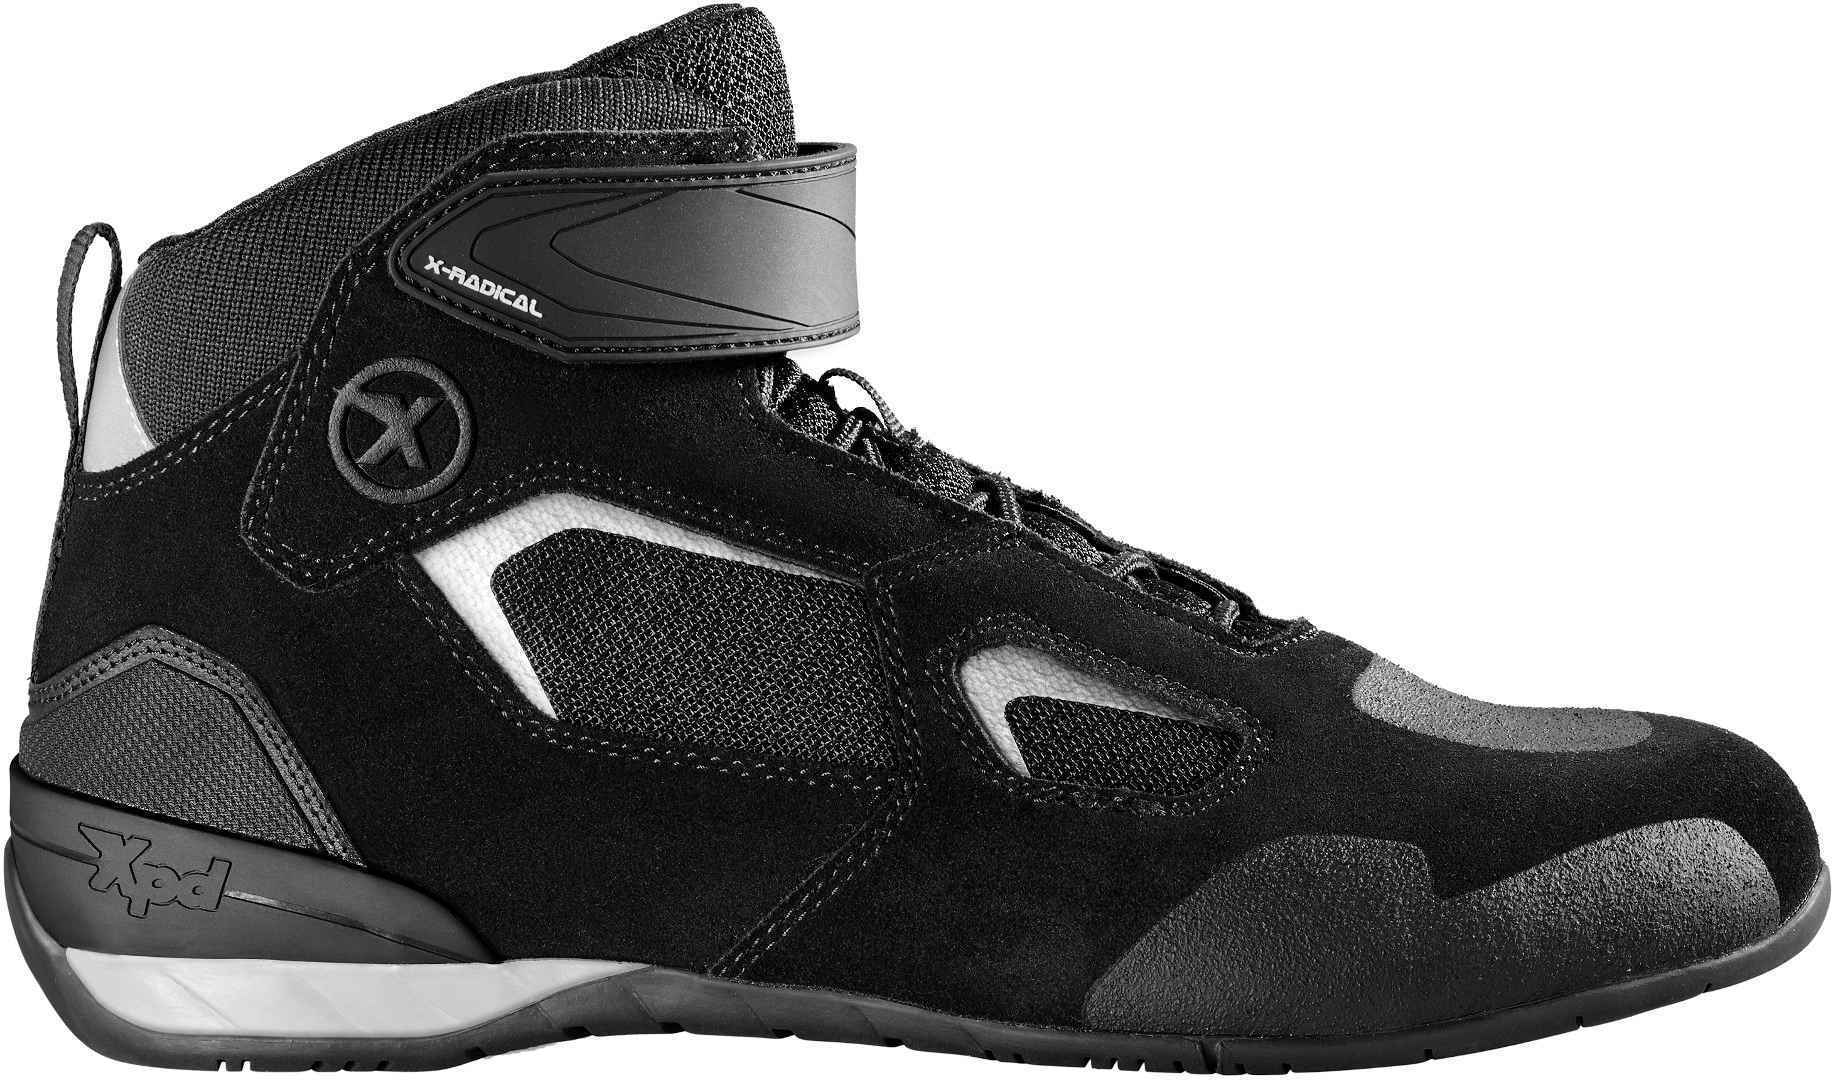 Photos - Motorcycle Boots Xpd X-Radical Motorcycle Shoes Unisex Black Grey Size: 41 s10101041